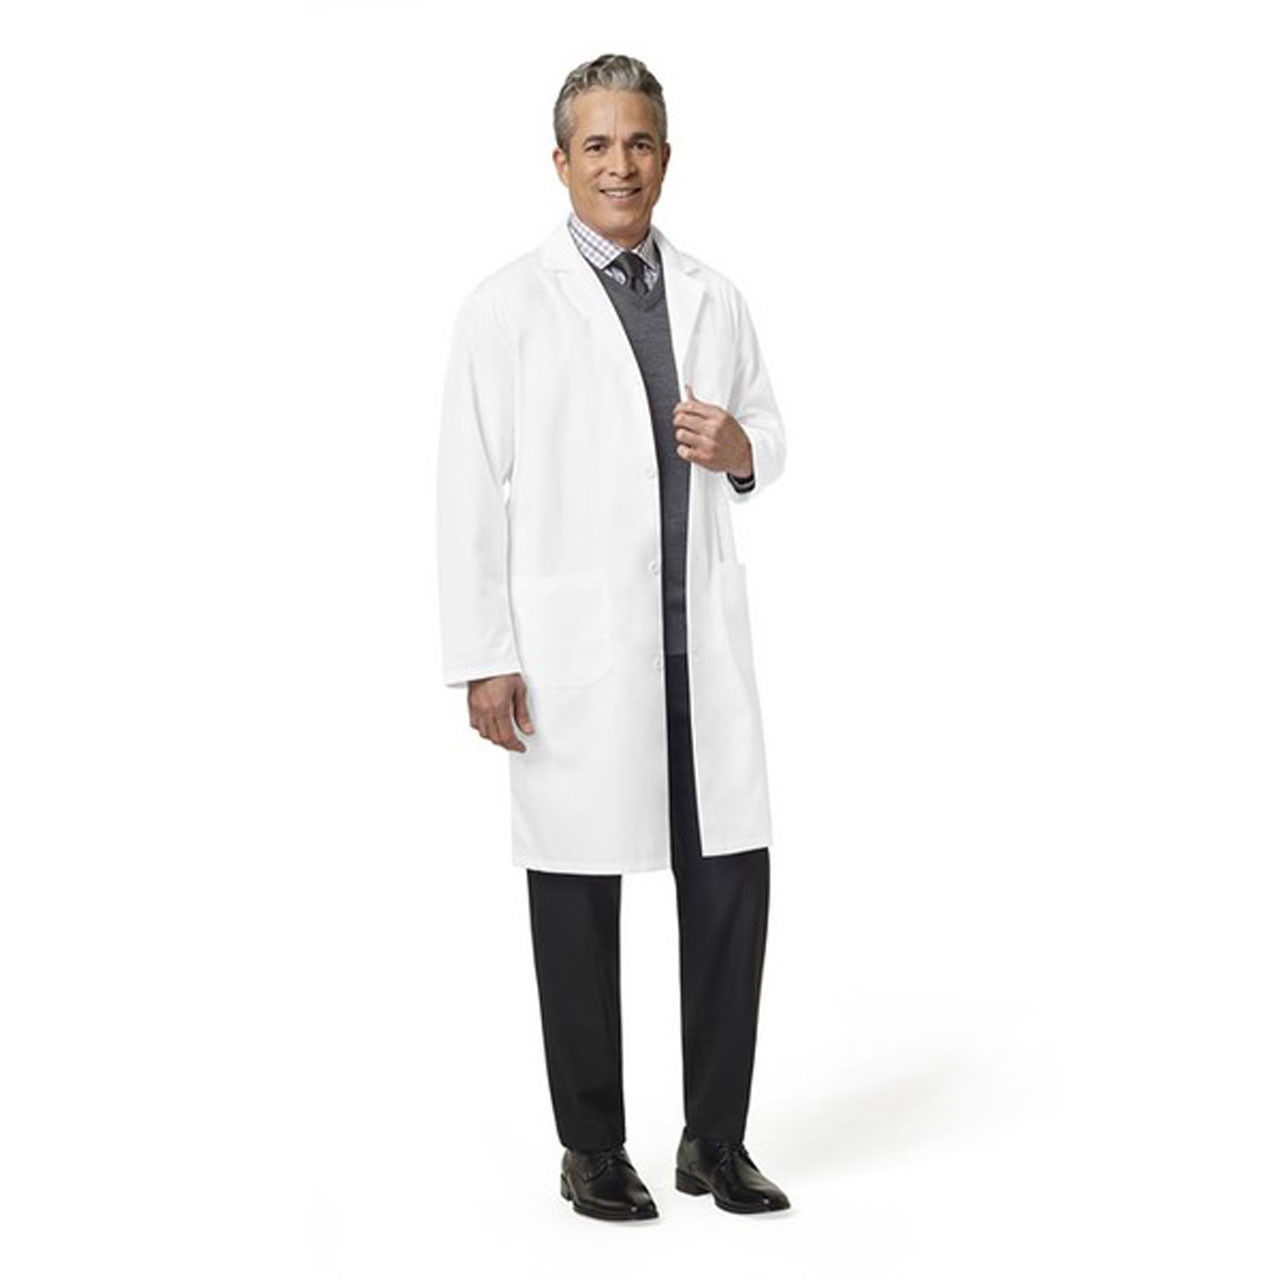 Is the combination lab coat from Fashion Seal ideal for me?